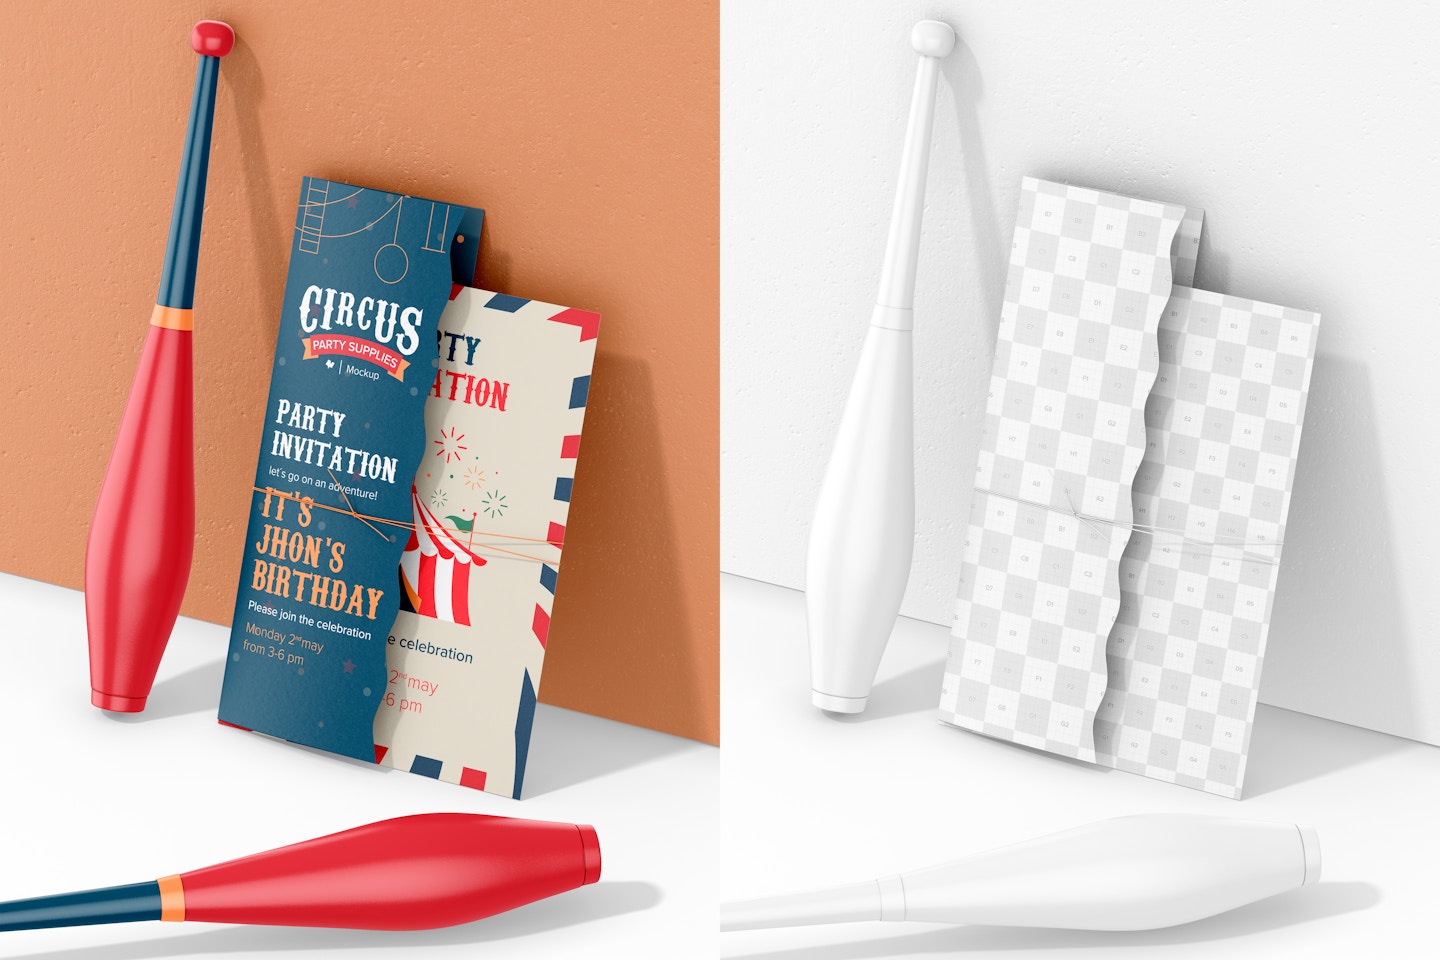 Circus Party Invitation Card Mockup, Leaned